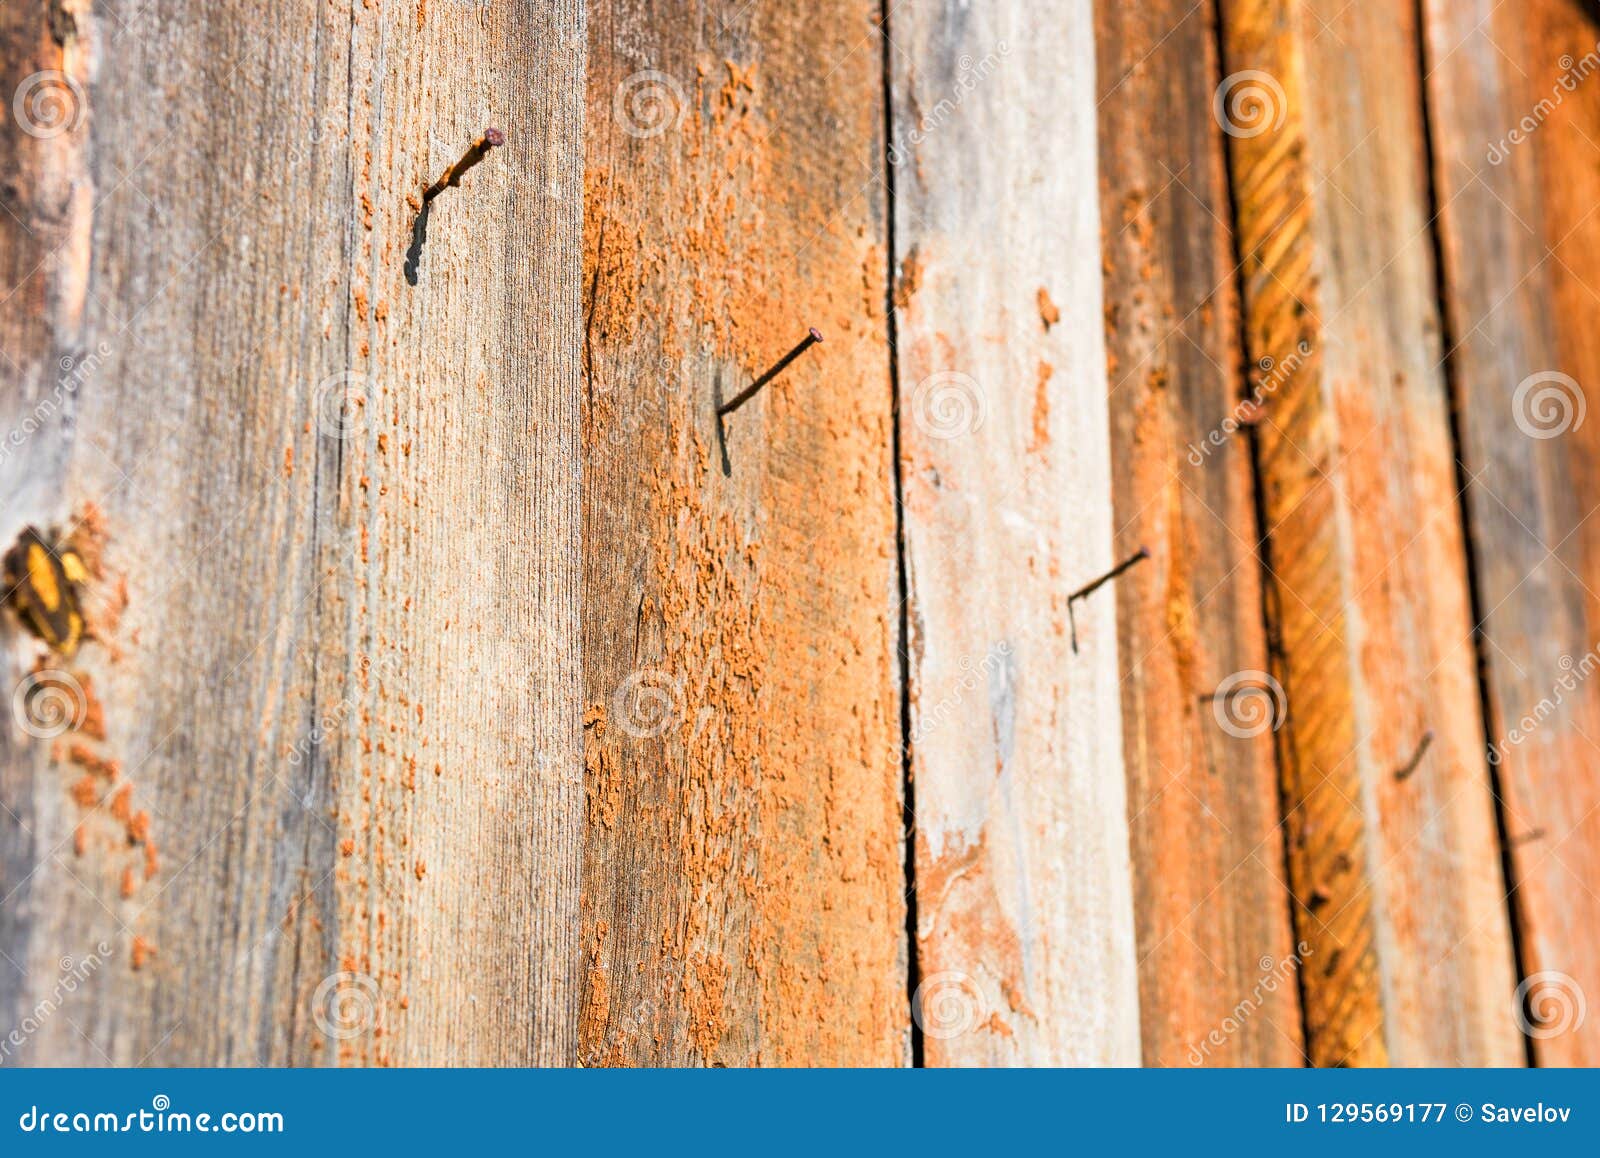 rusty nails protrude from wooden planks, soft focus